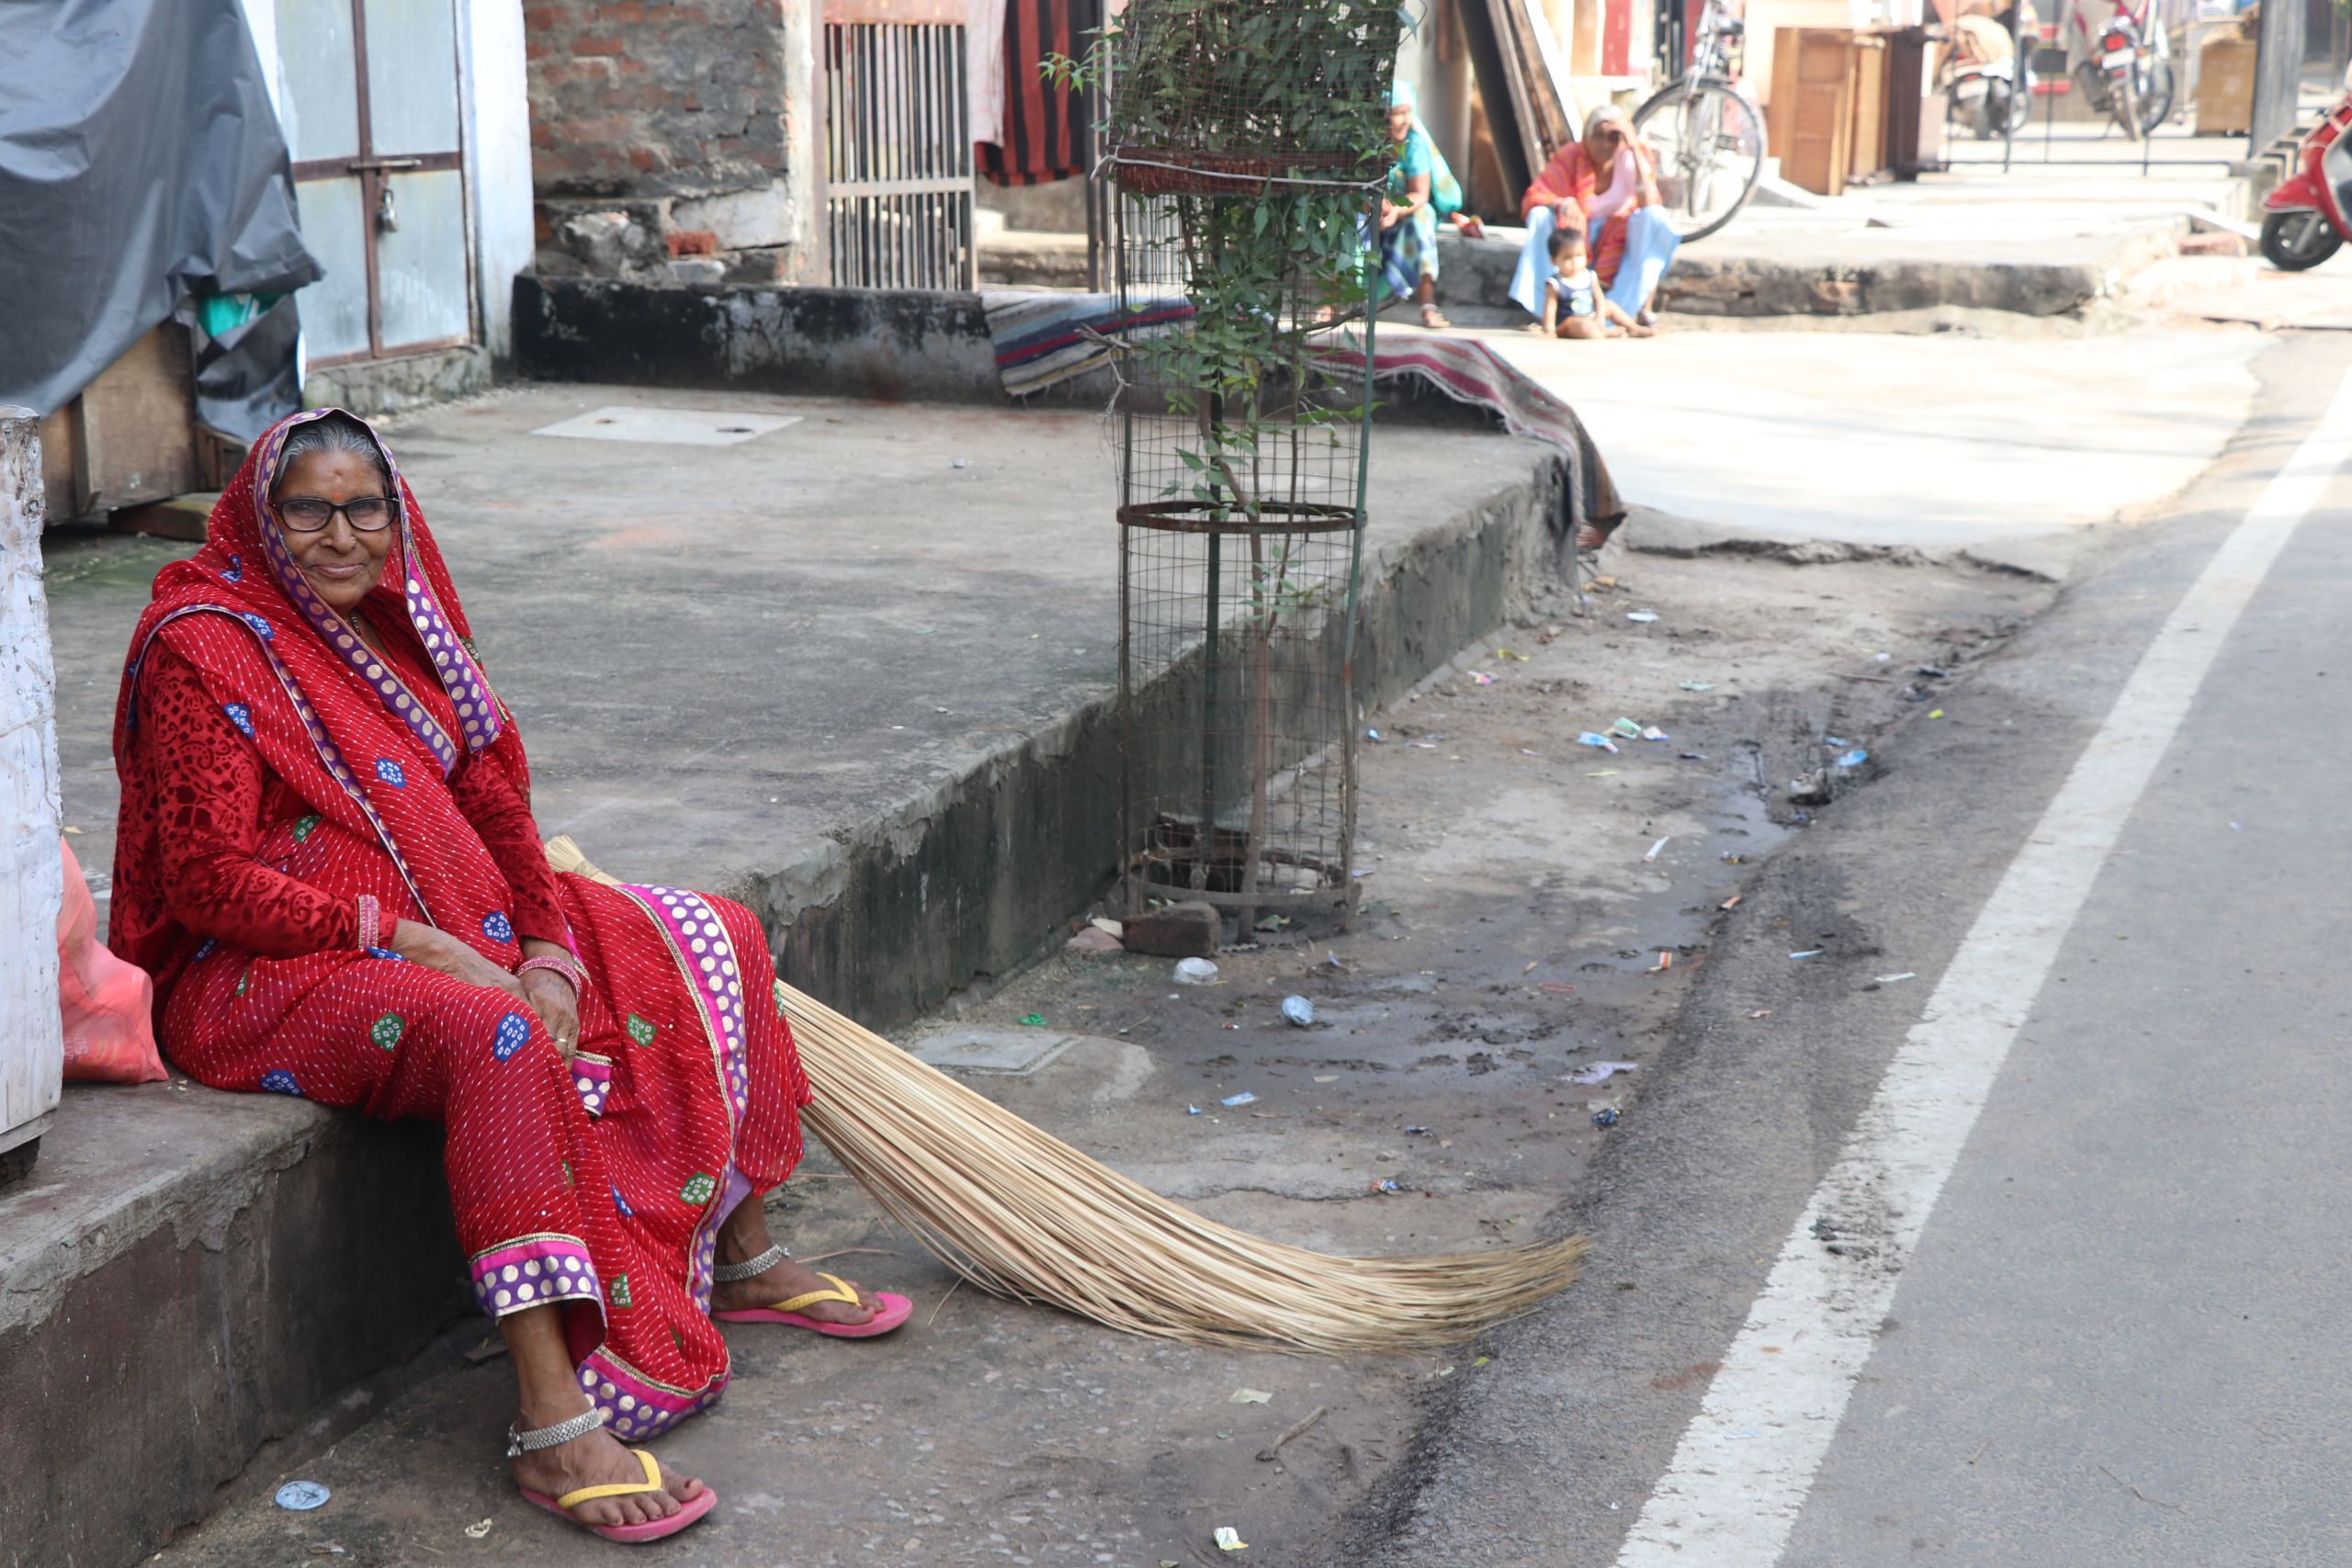 A street cleaner having a rest after sweeping the gutters